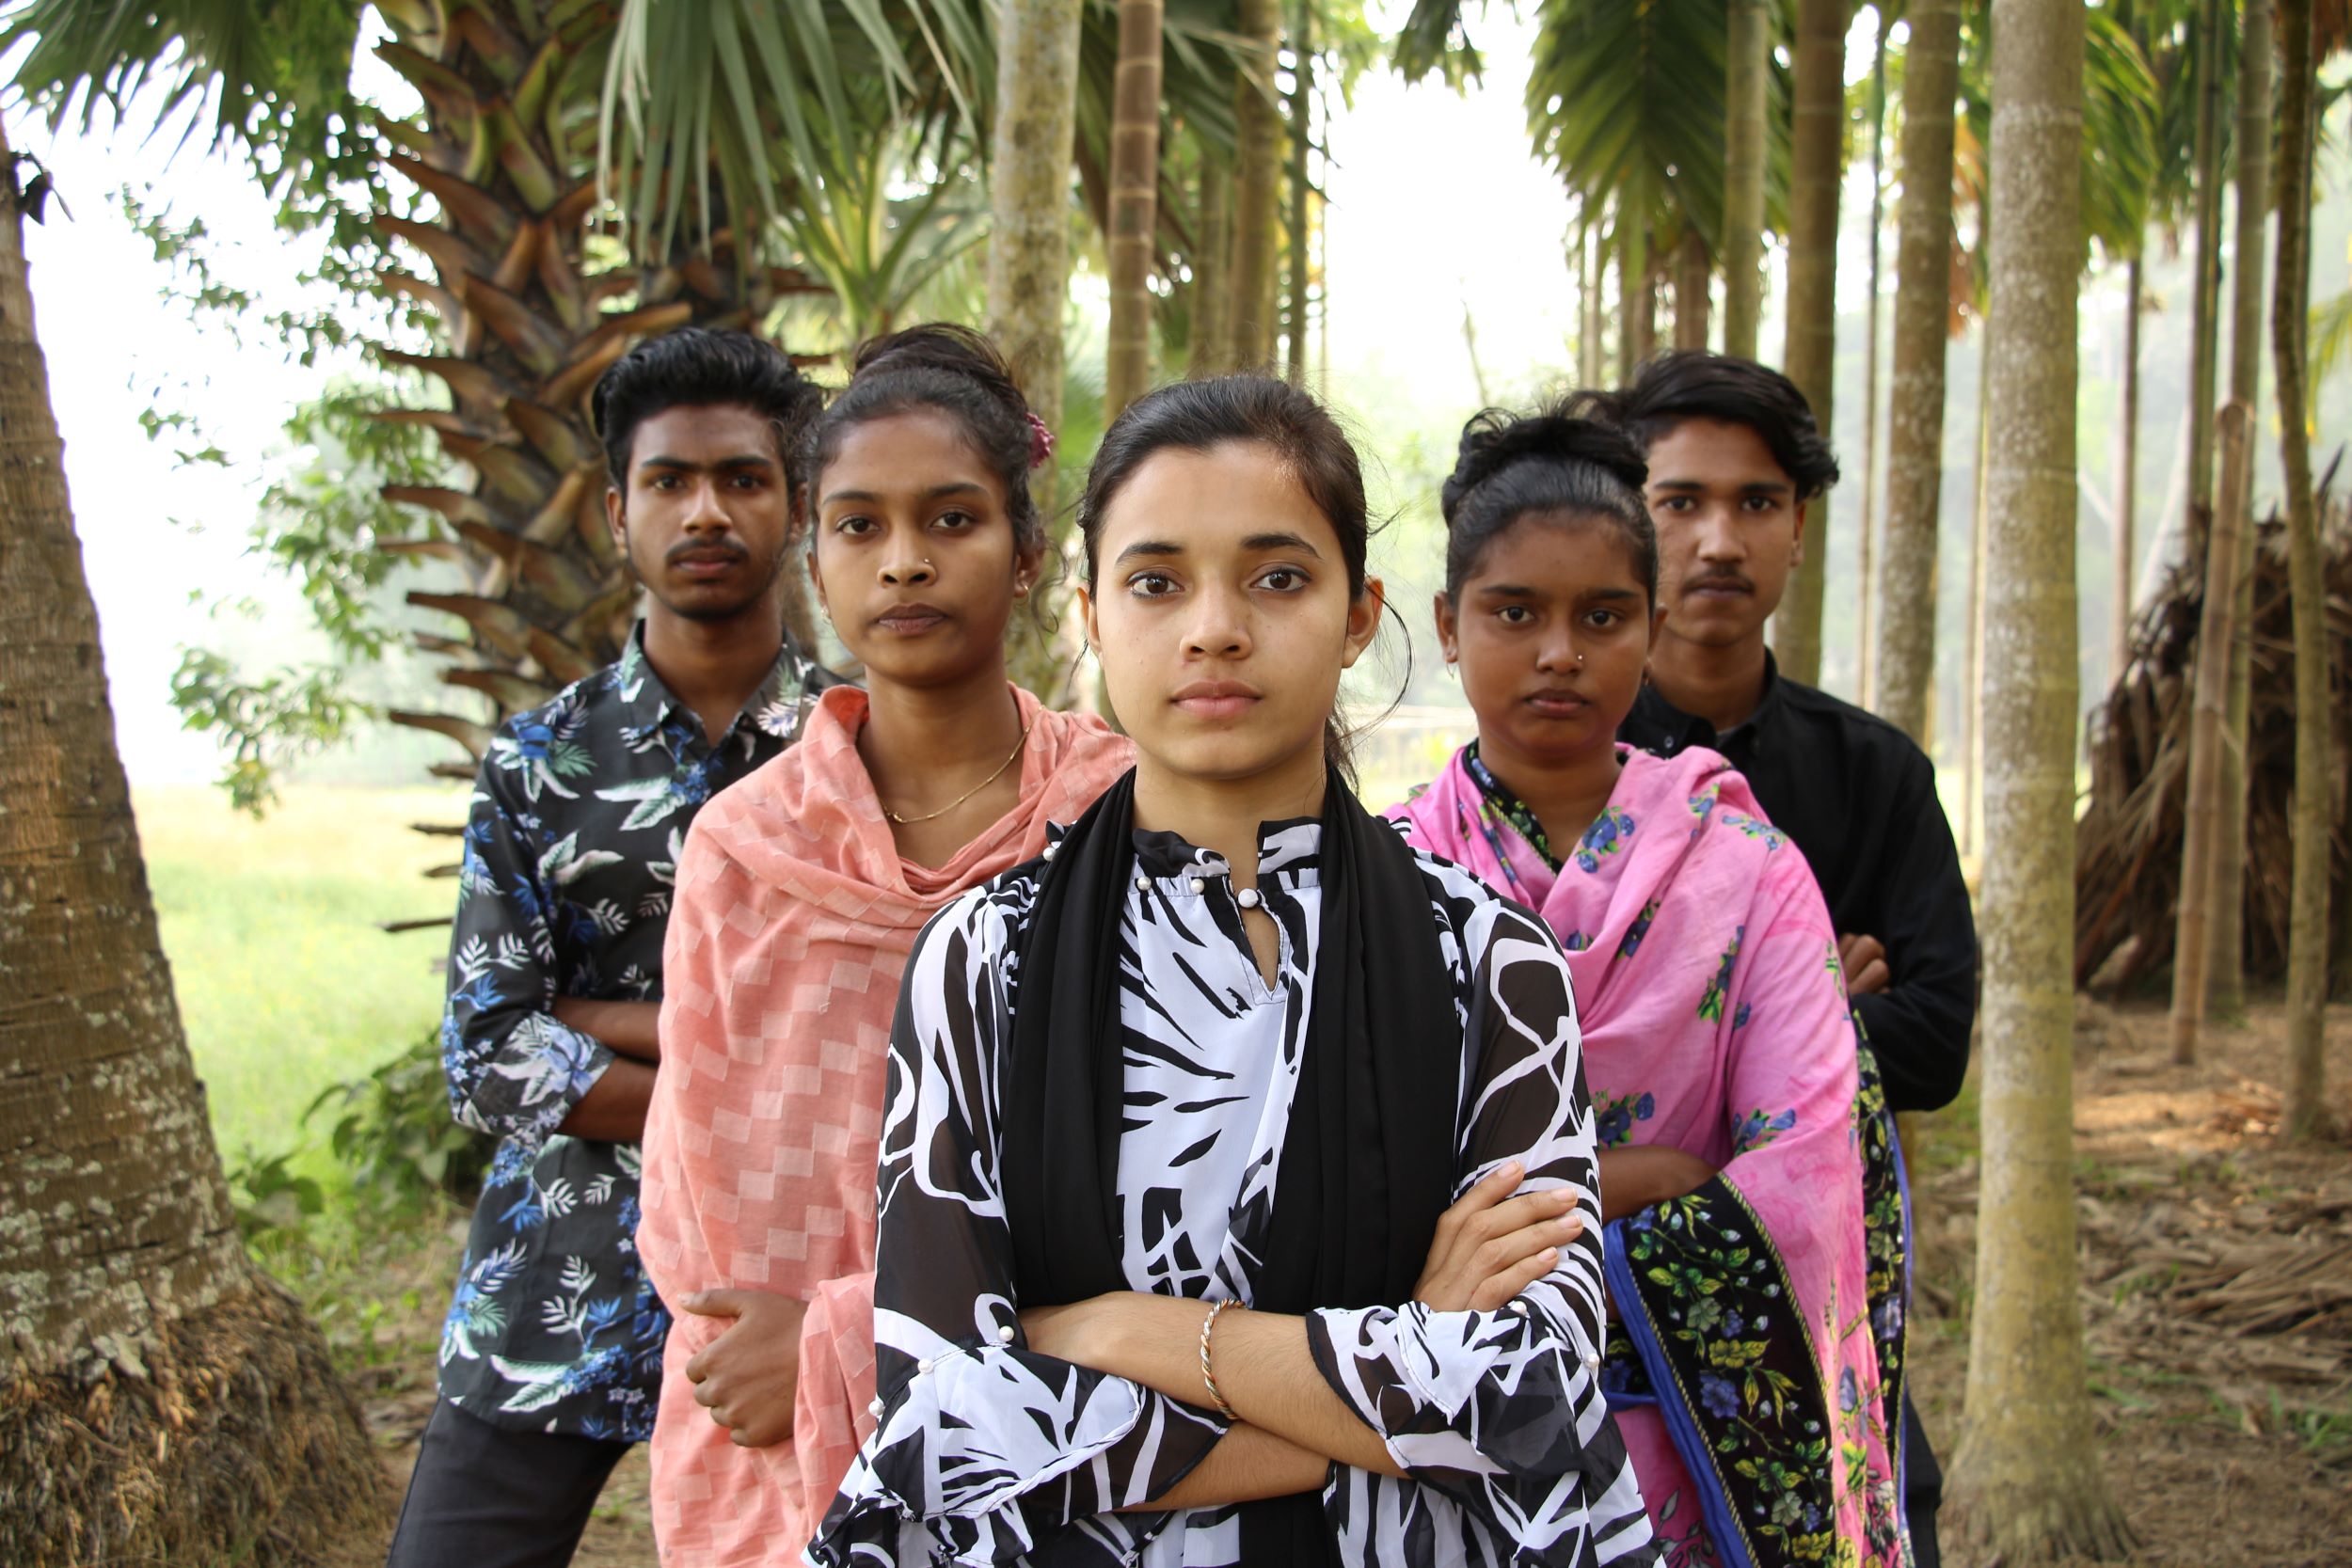 Monika pictured with others fighting child marriage in Bangladesh